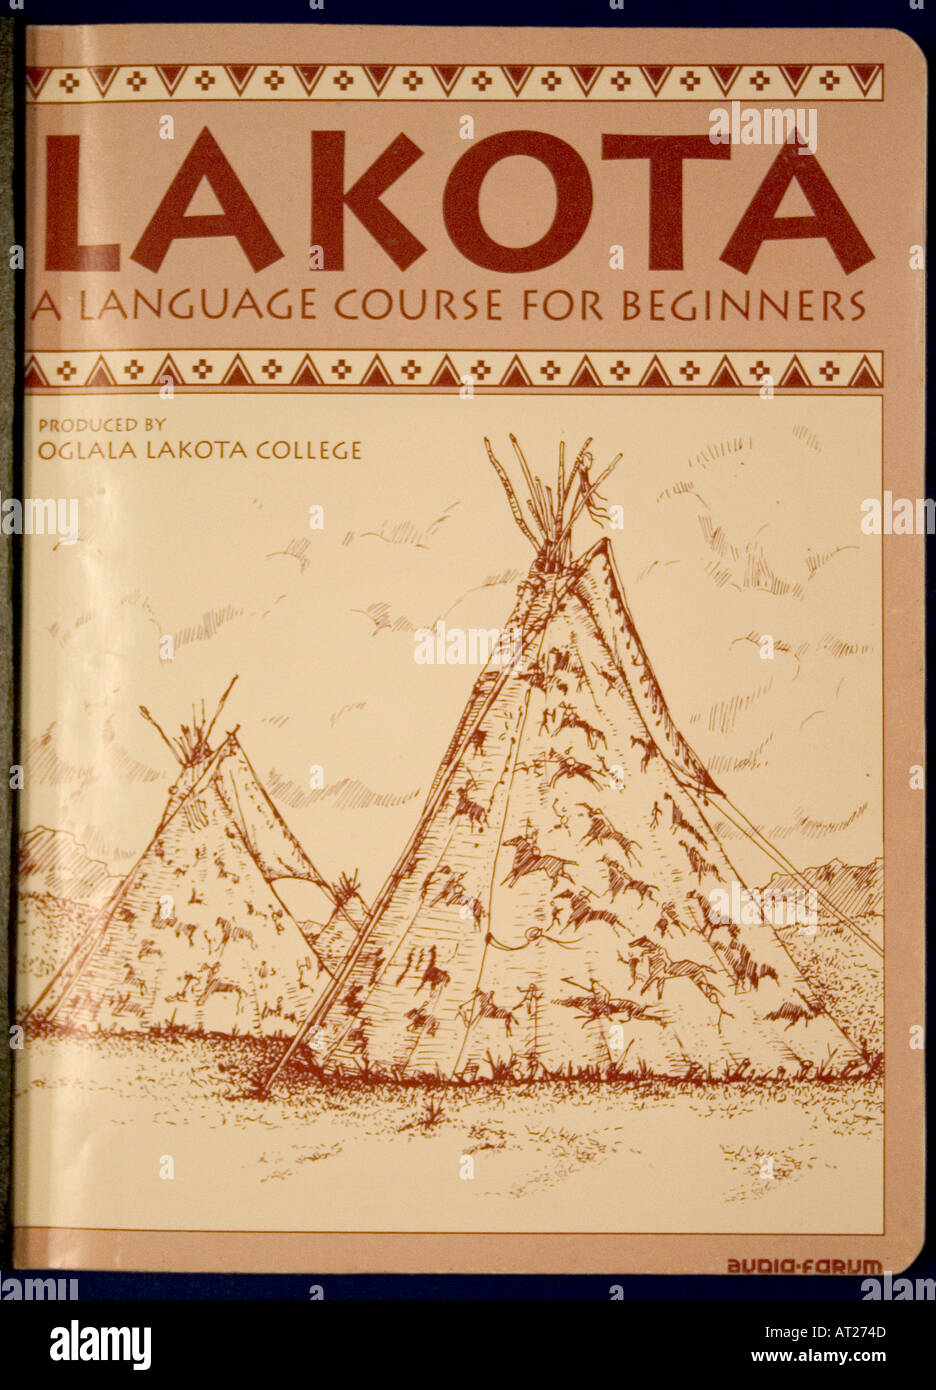 American Indian Lakota language course for beginners found in the Central Library Marquette. Minneapolis Minnesota MN USA Stock Photo